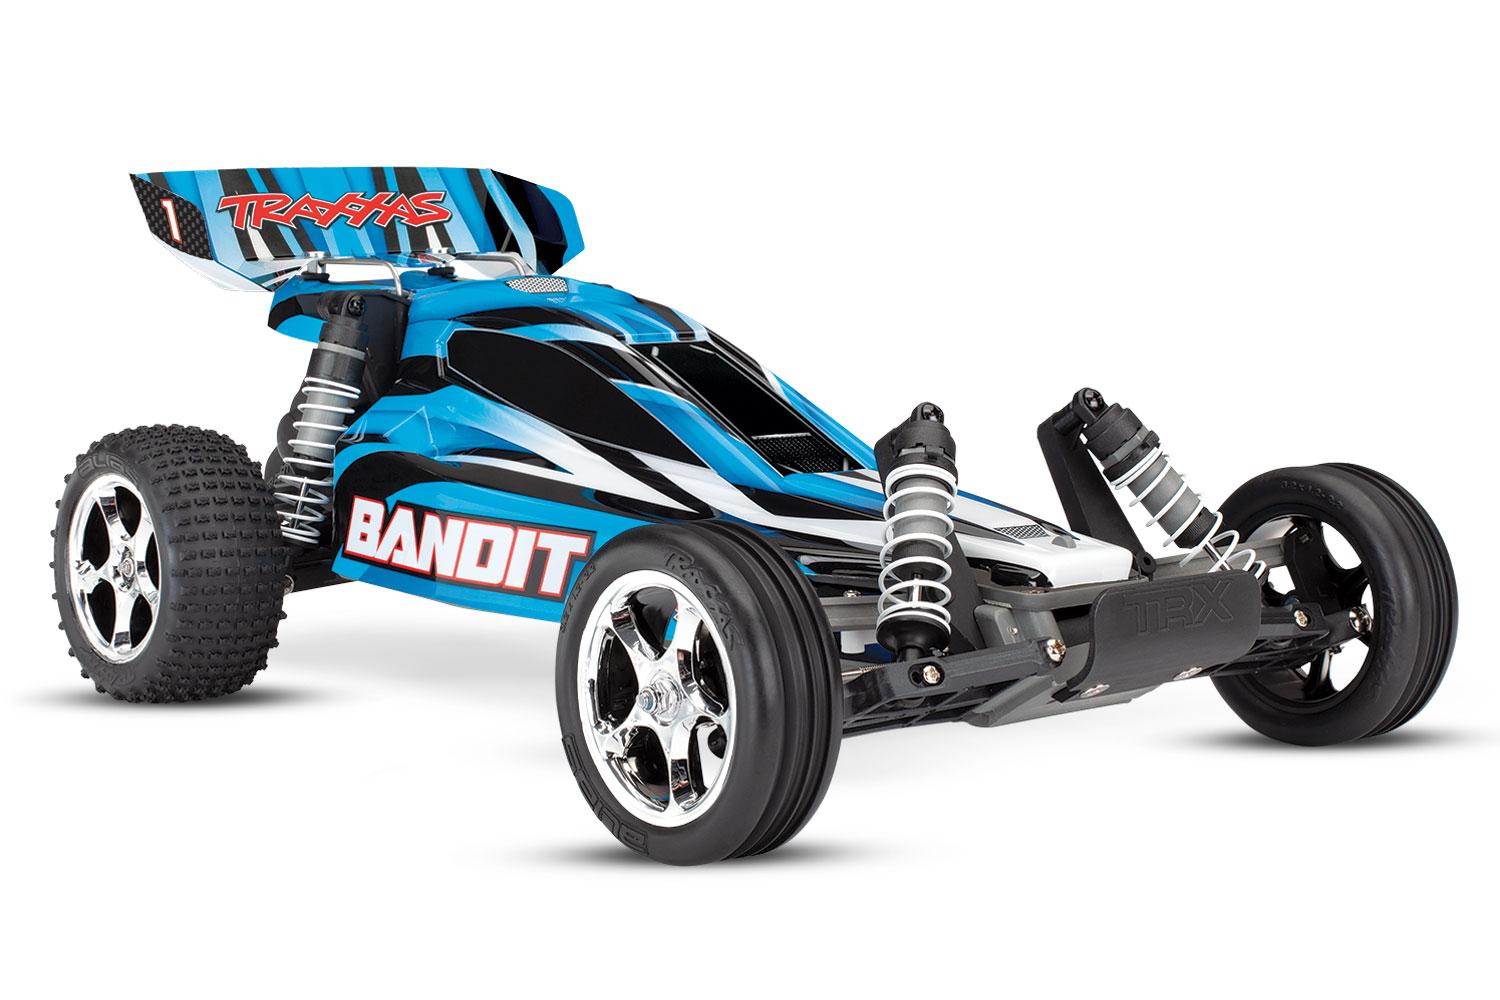 Traxxas Rc Cars Under $50: Top-Quality RC Cars Under $50 from Traxxas